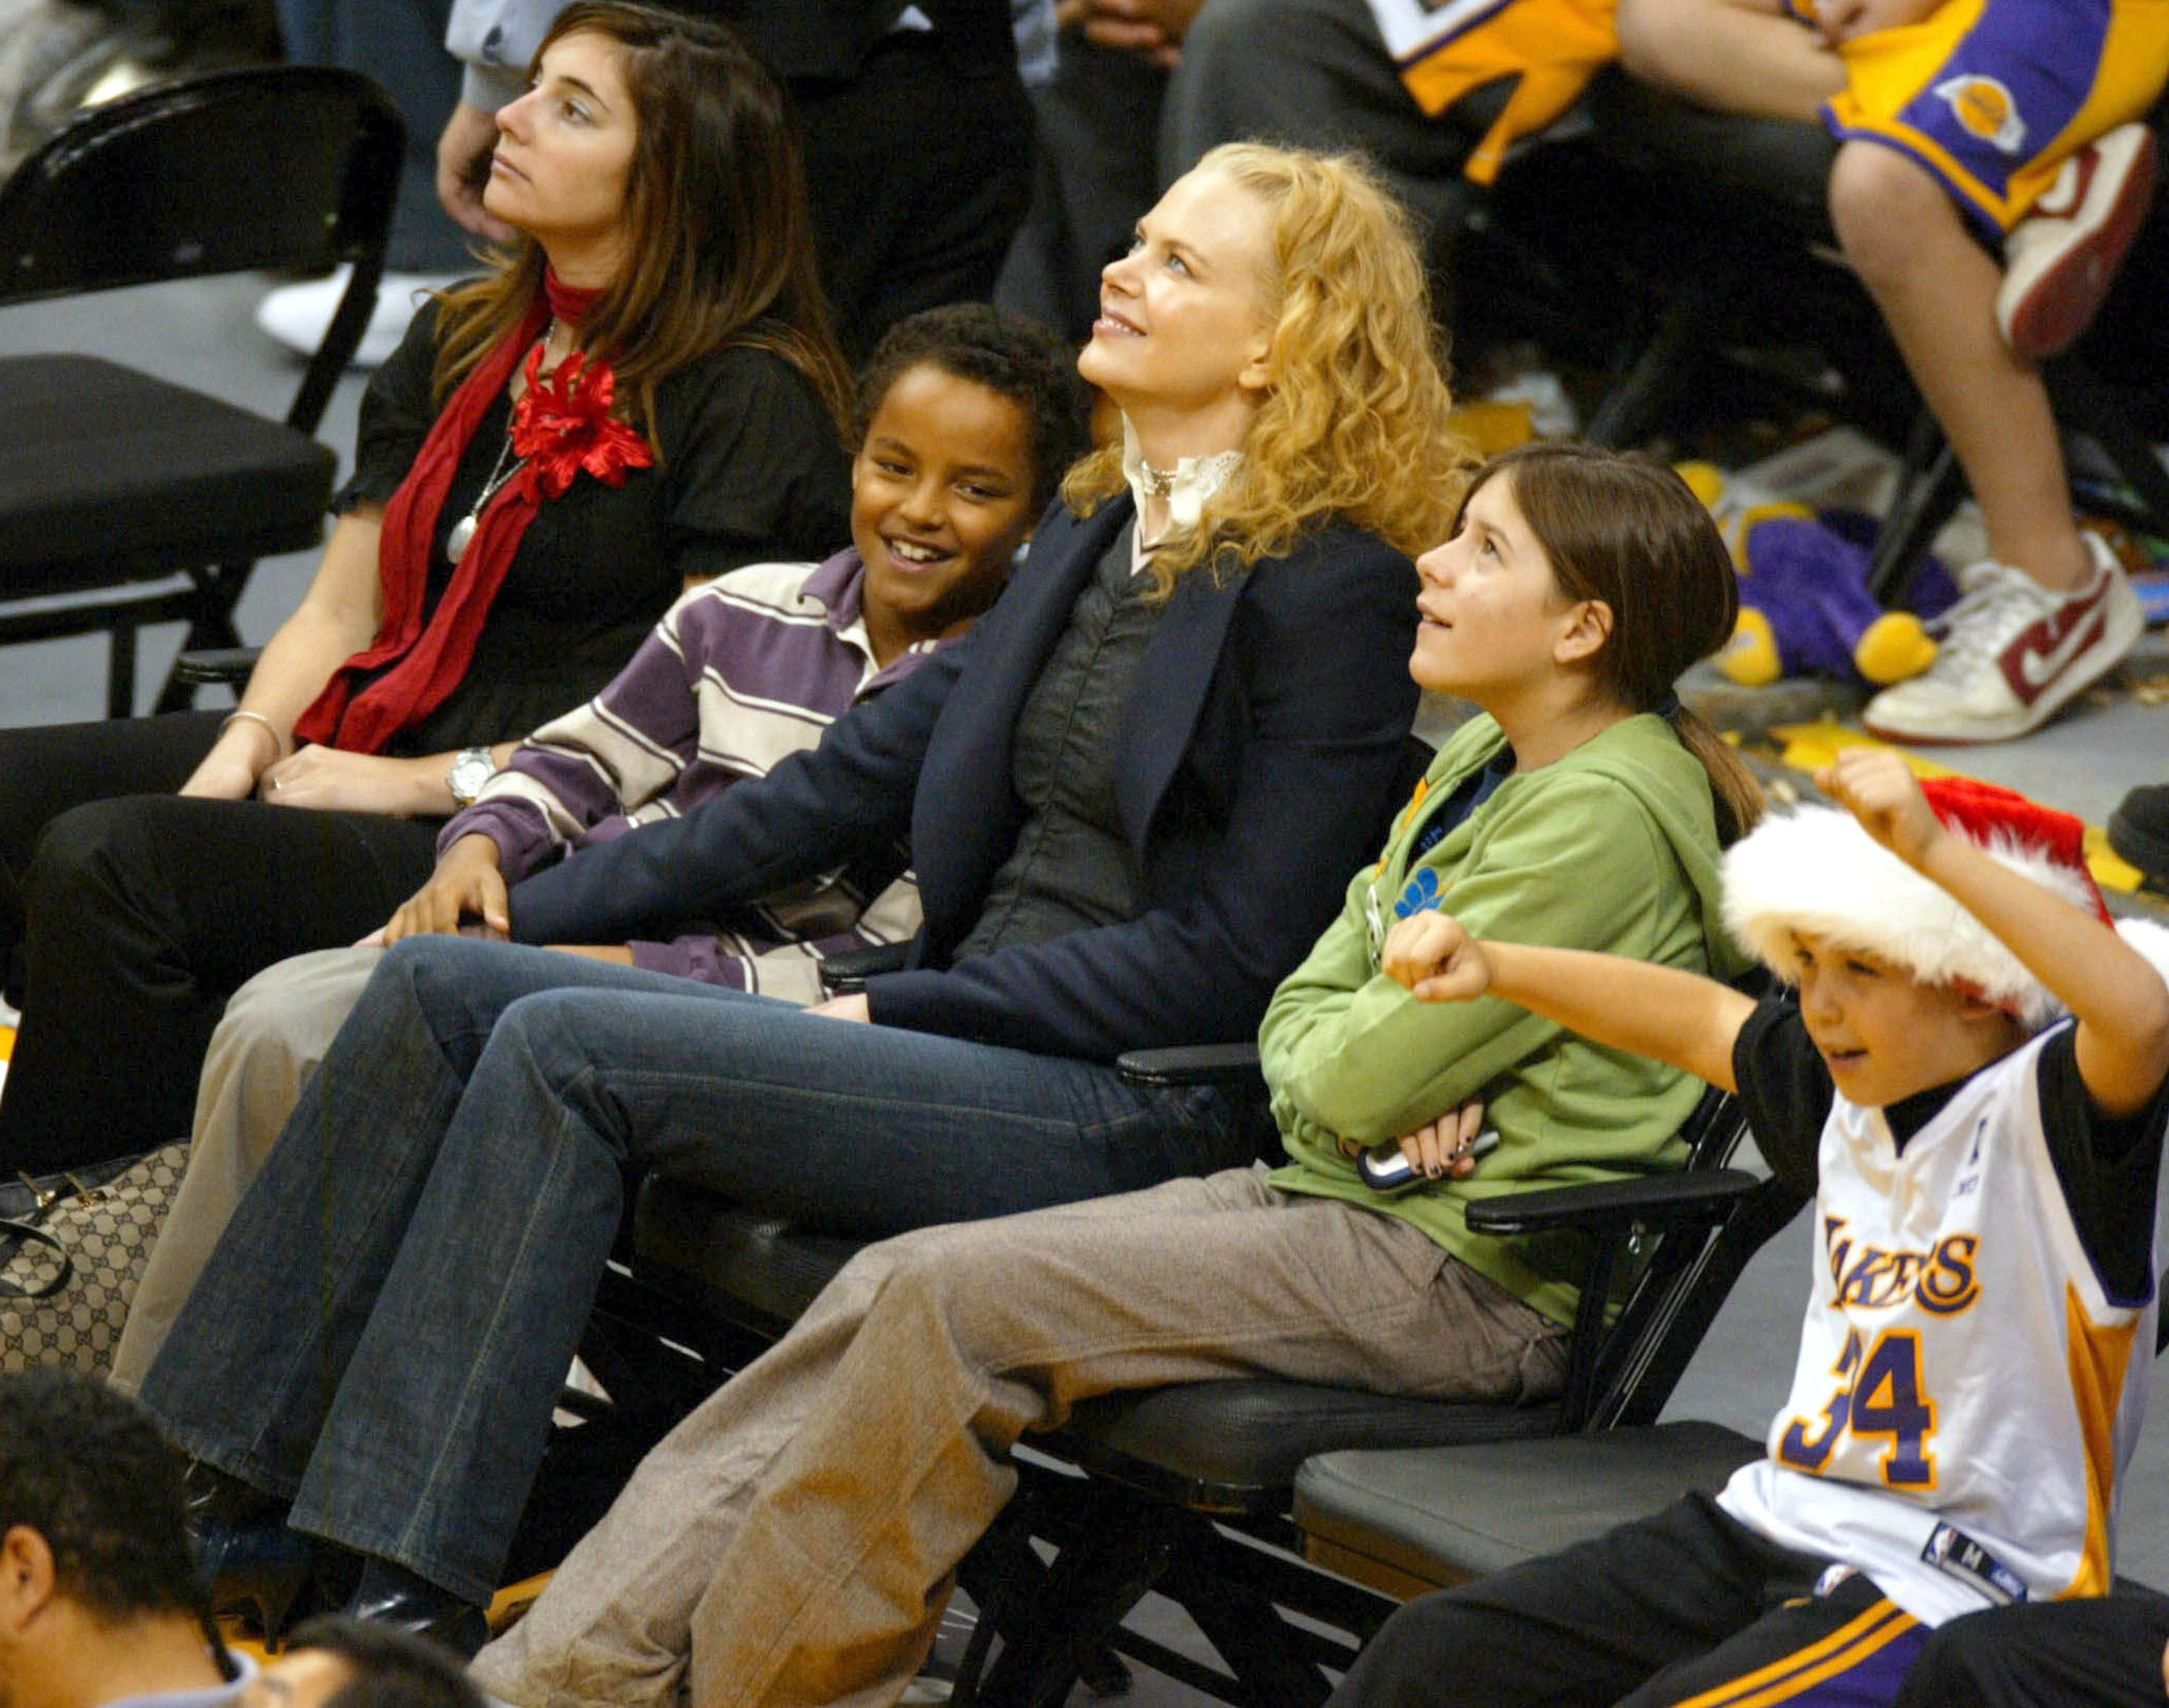 Nicole Kidman with Connor and Isabella Cruise at a game between the Los Angeles Lakers and the Miami Heat at the Staples Center December 25, 2004 in Los Angeles, California | Source: Getty Images